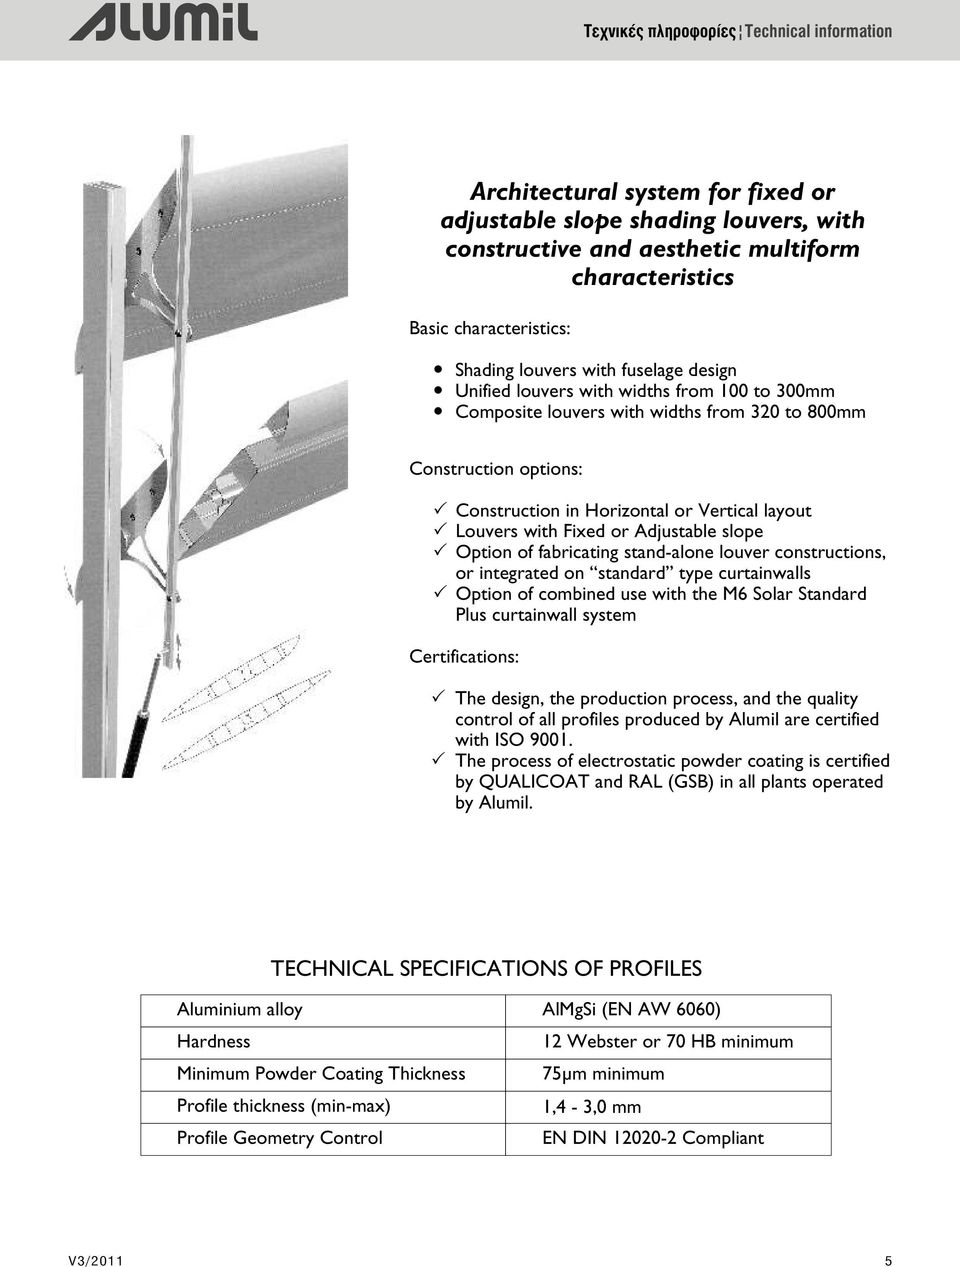 PLouvers with Fixed or Adjustable slope POption of fabricating stand-alone louver constructions, or integrated on standard type curtainwalls POption of combined use with the Ì6 Solar Standard Plus